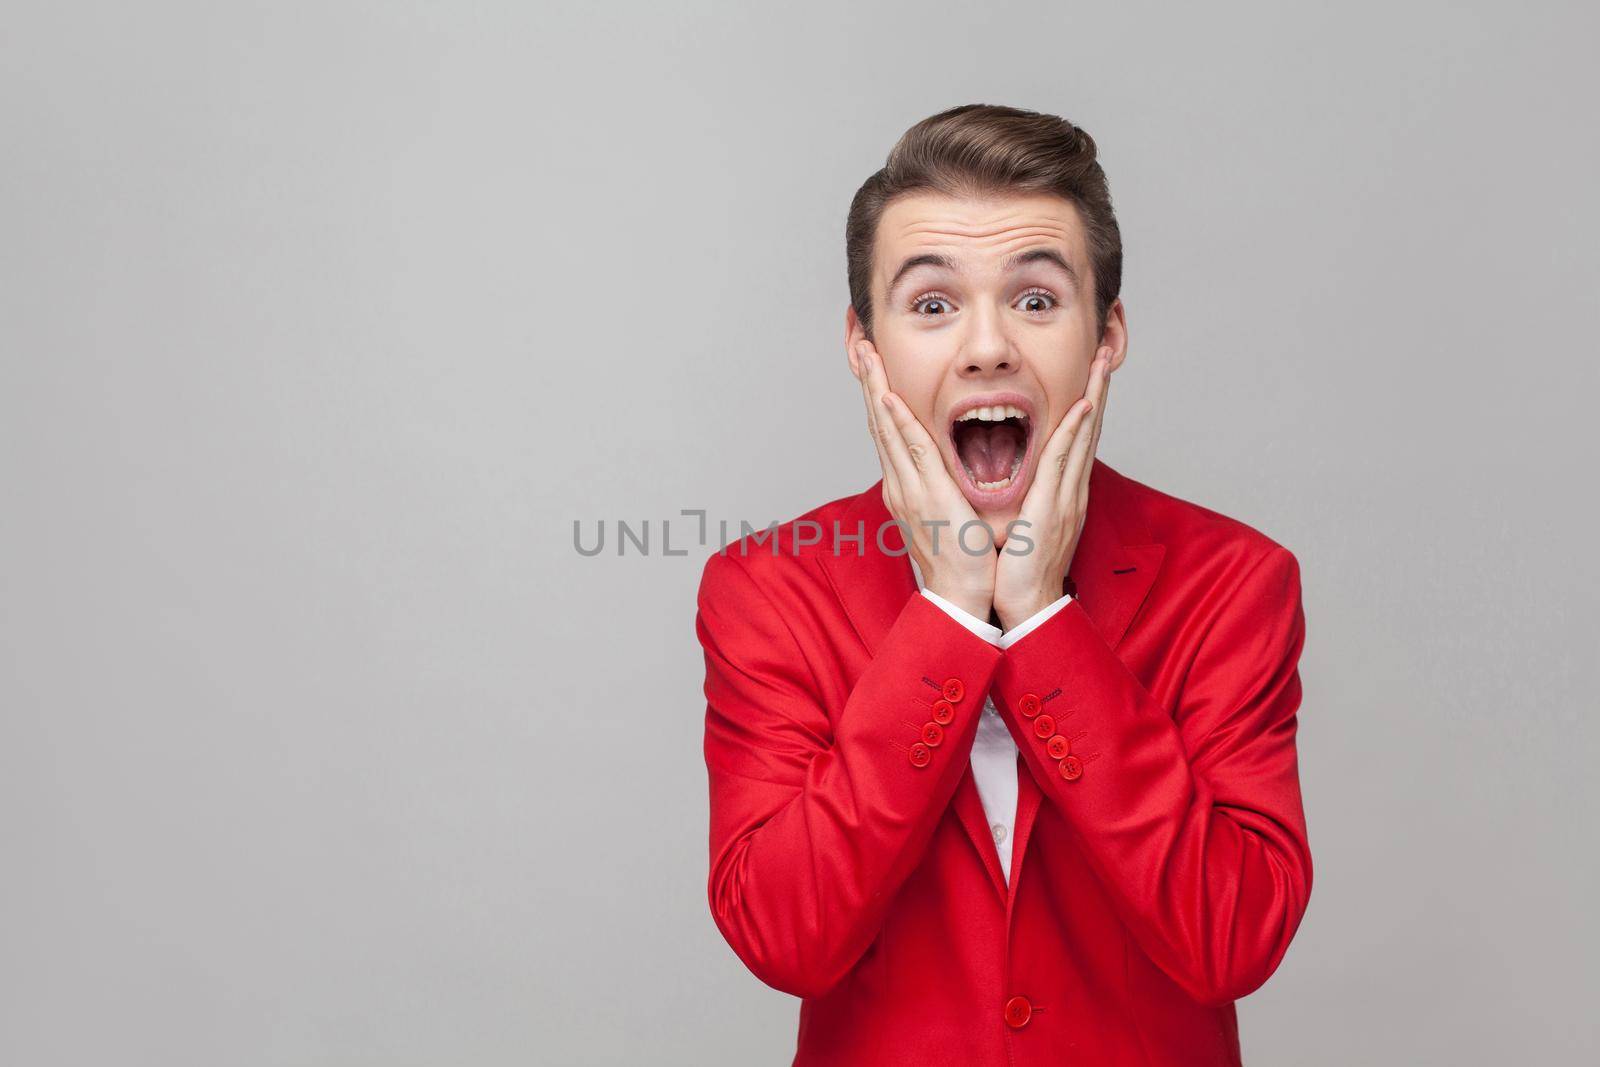 Oh my god. Portrait of extremely amazed gentleman with stylish hairdo in red tuxedo and bow tie holding hands on cheeks and looking at camera with shocked eyes. indoor studio shot, gray background